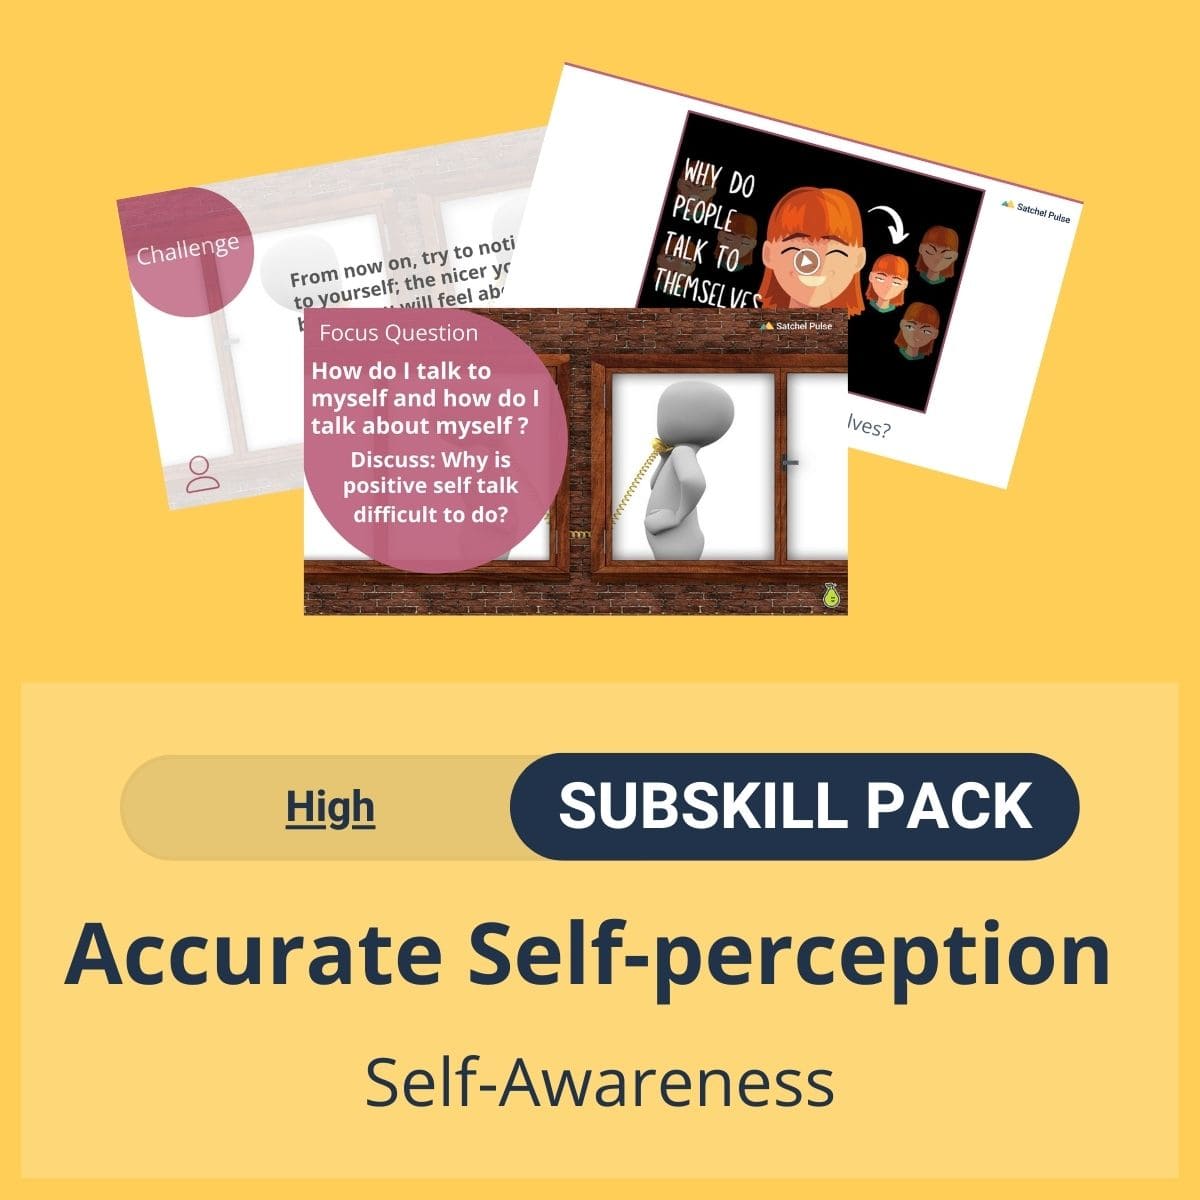 SEL Resource pack with social-emotional learning lessons and self-studies to help you teach Accurate Self-perception in your classroom as a part of the SEL curriculum.